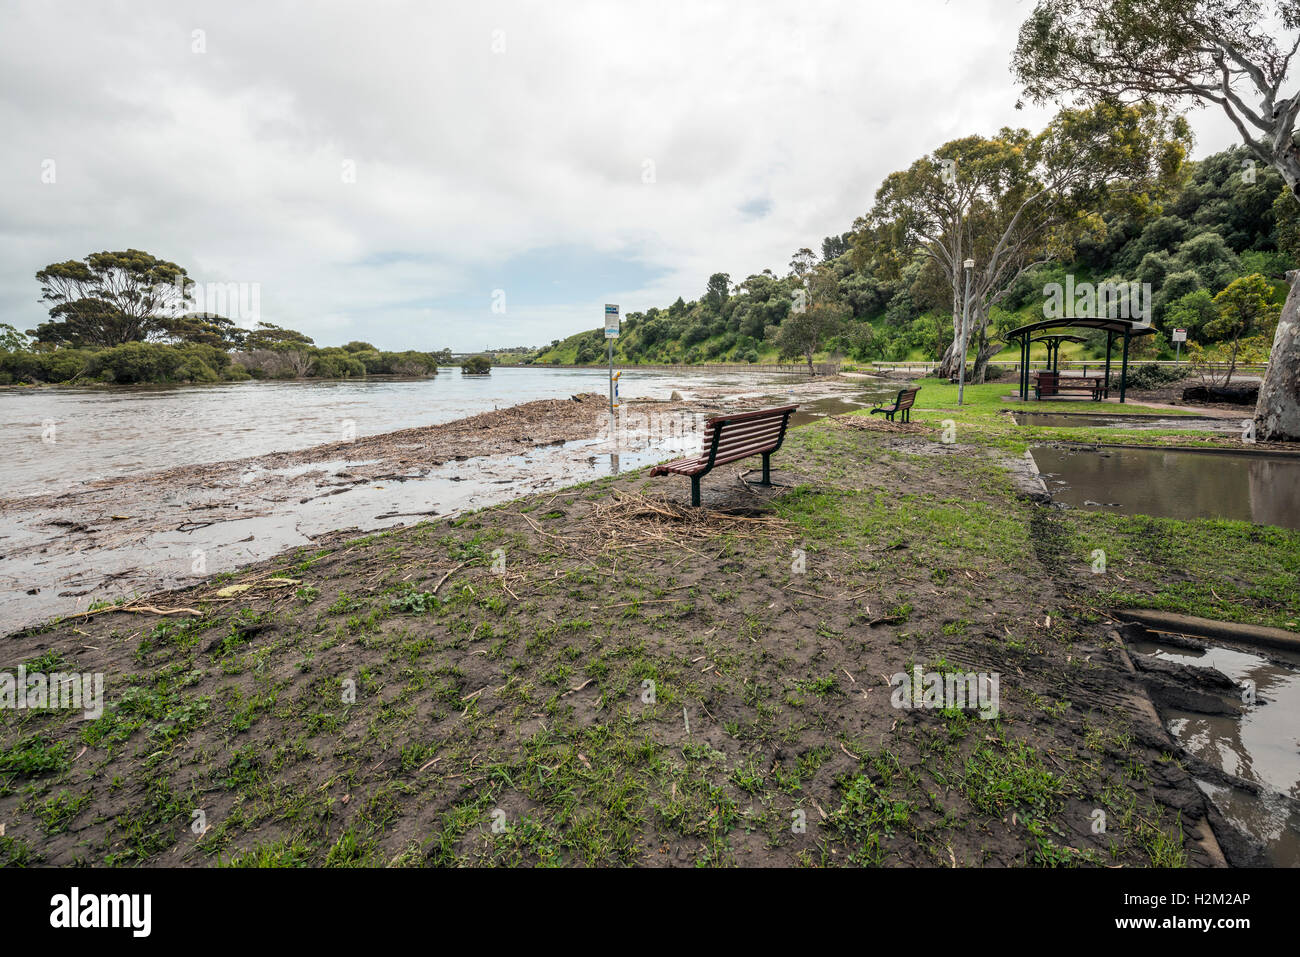 Old Noarlunga, South Australia. 30th September, 2016. The flood swollen Onkaparinga River breaks its banks flooding recreation grounds near Port Noarlunga, south of Adelaide, as the biggest storm in 50 years hits South Australia. Credit:  Raymond Warren/Alamy Live News Stock Photo